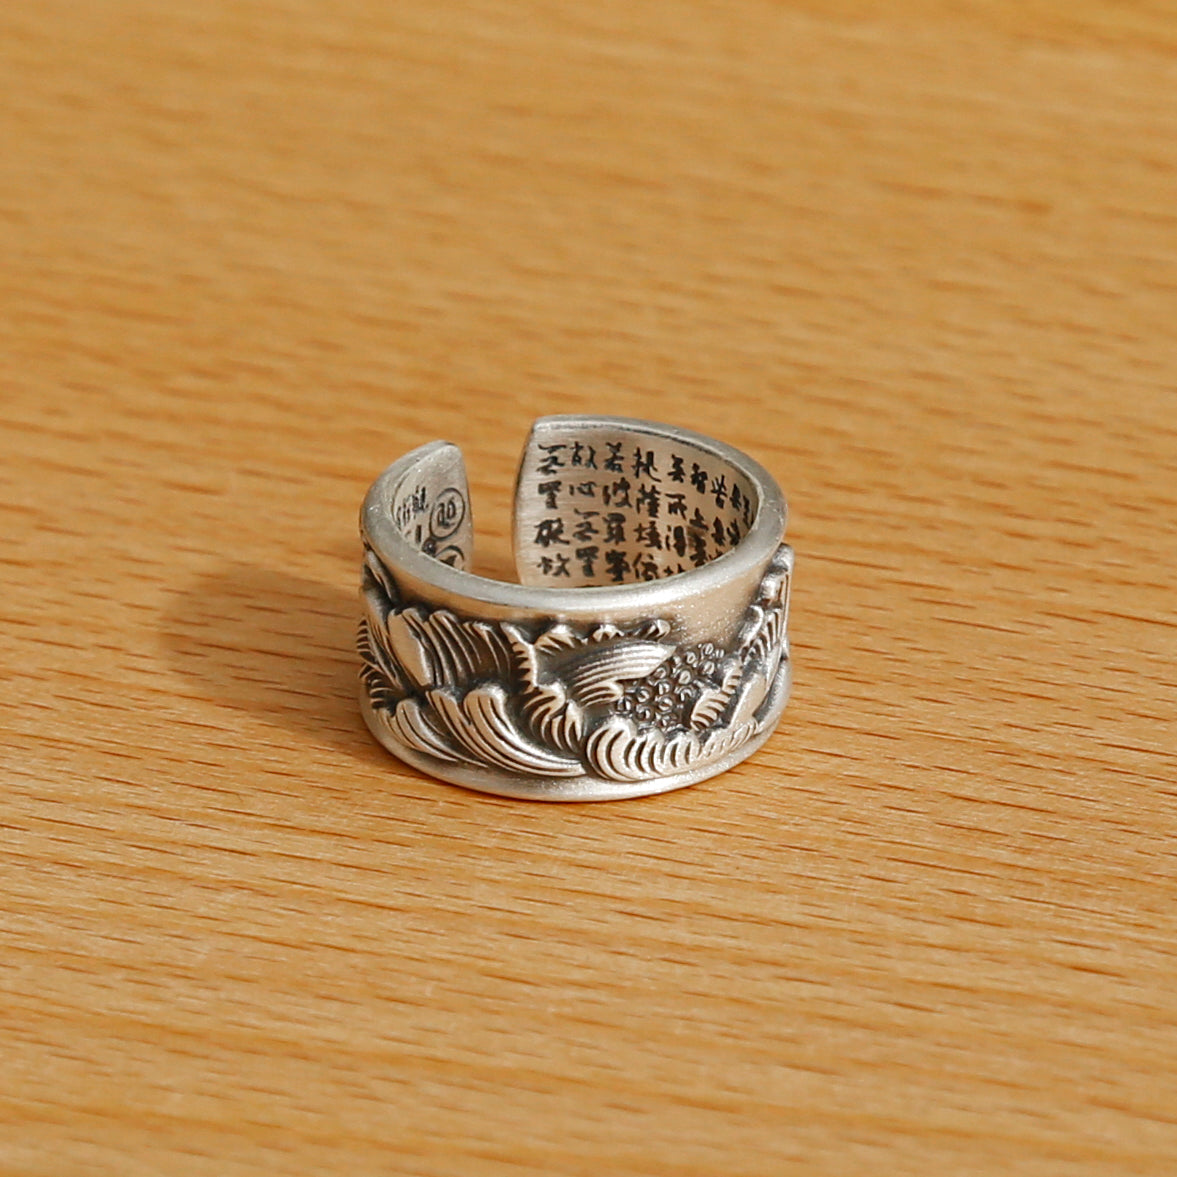 Vintage Style Engraved Peony Adjustable Silver Ring, Buddhist Sutra Mens Ring - ZentralDesigns